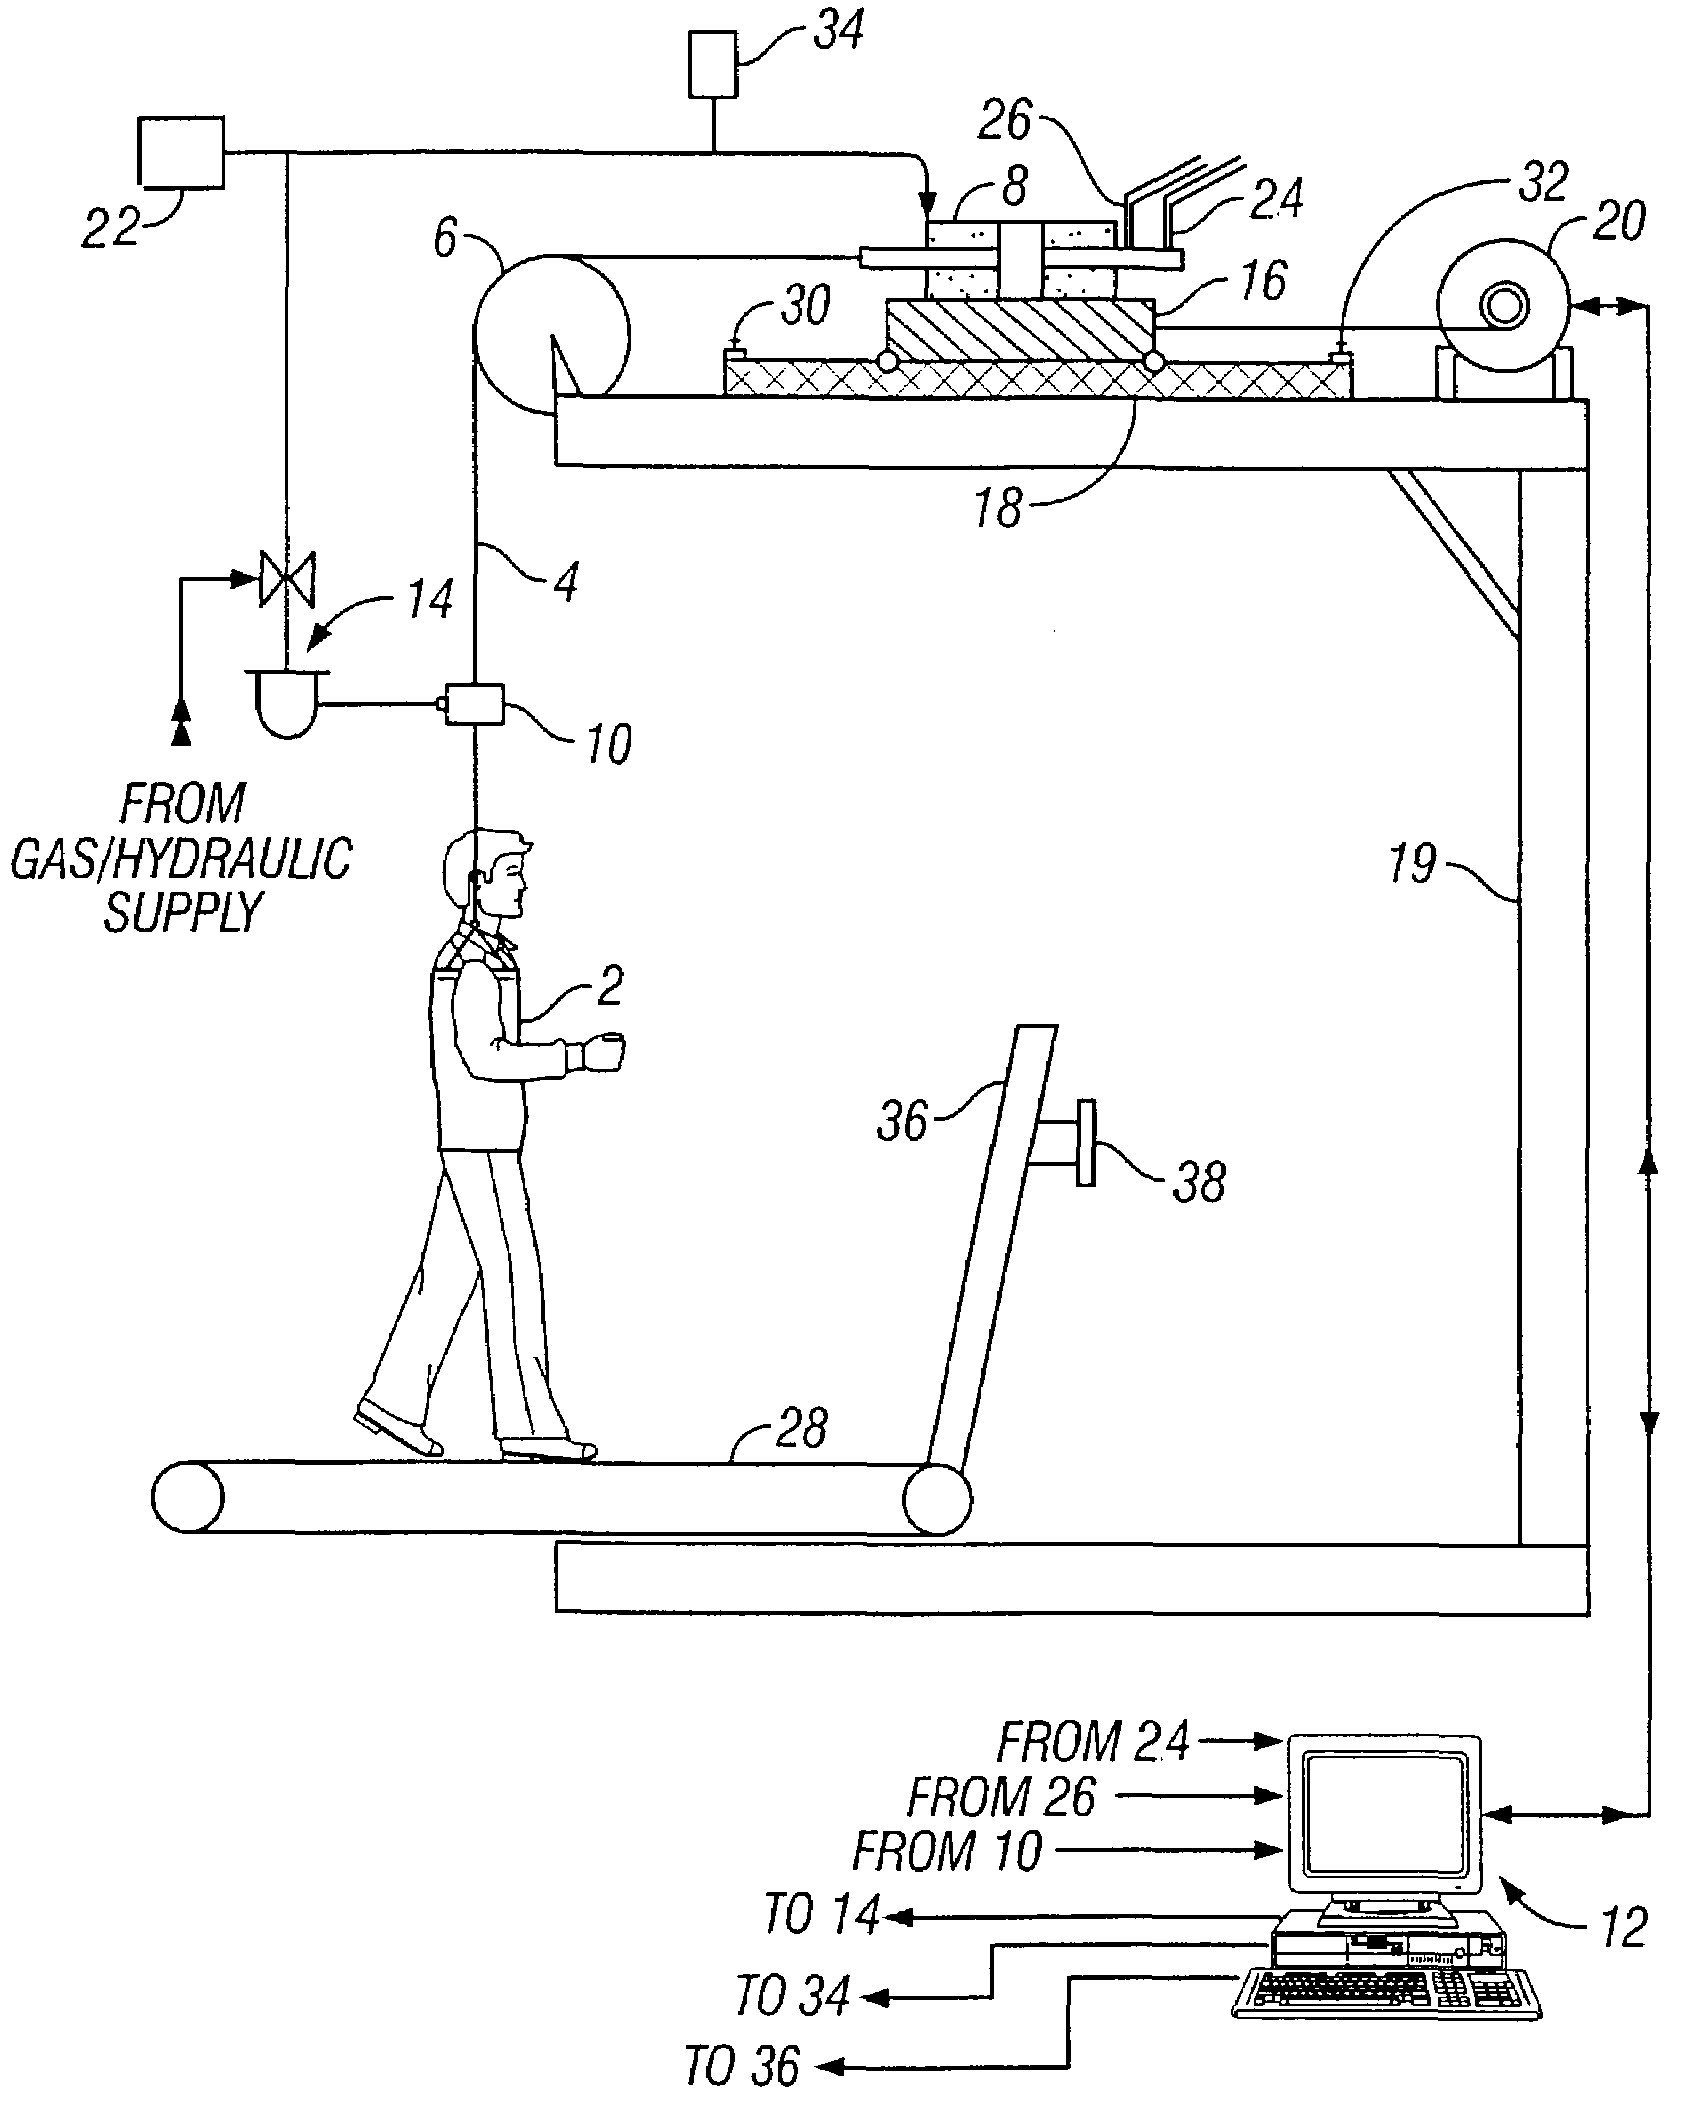 Closed-loop force controlled body weight support system